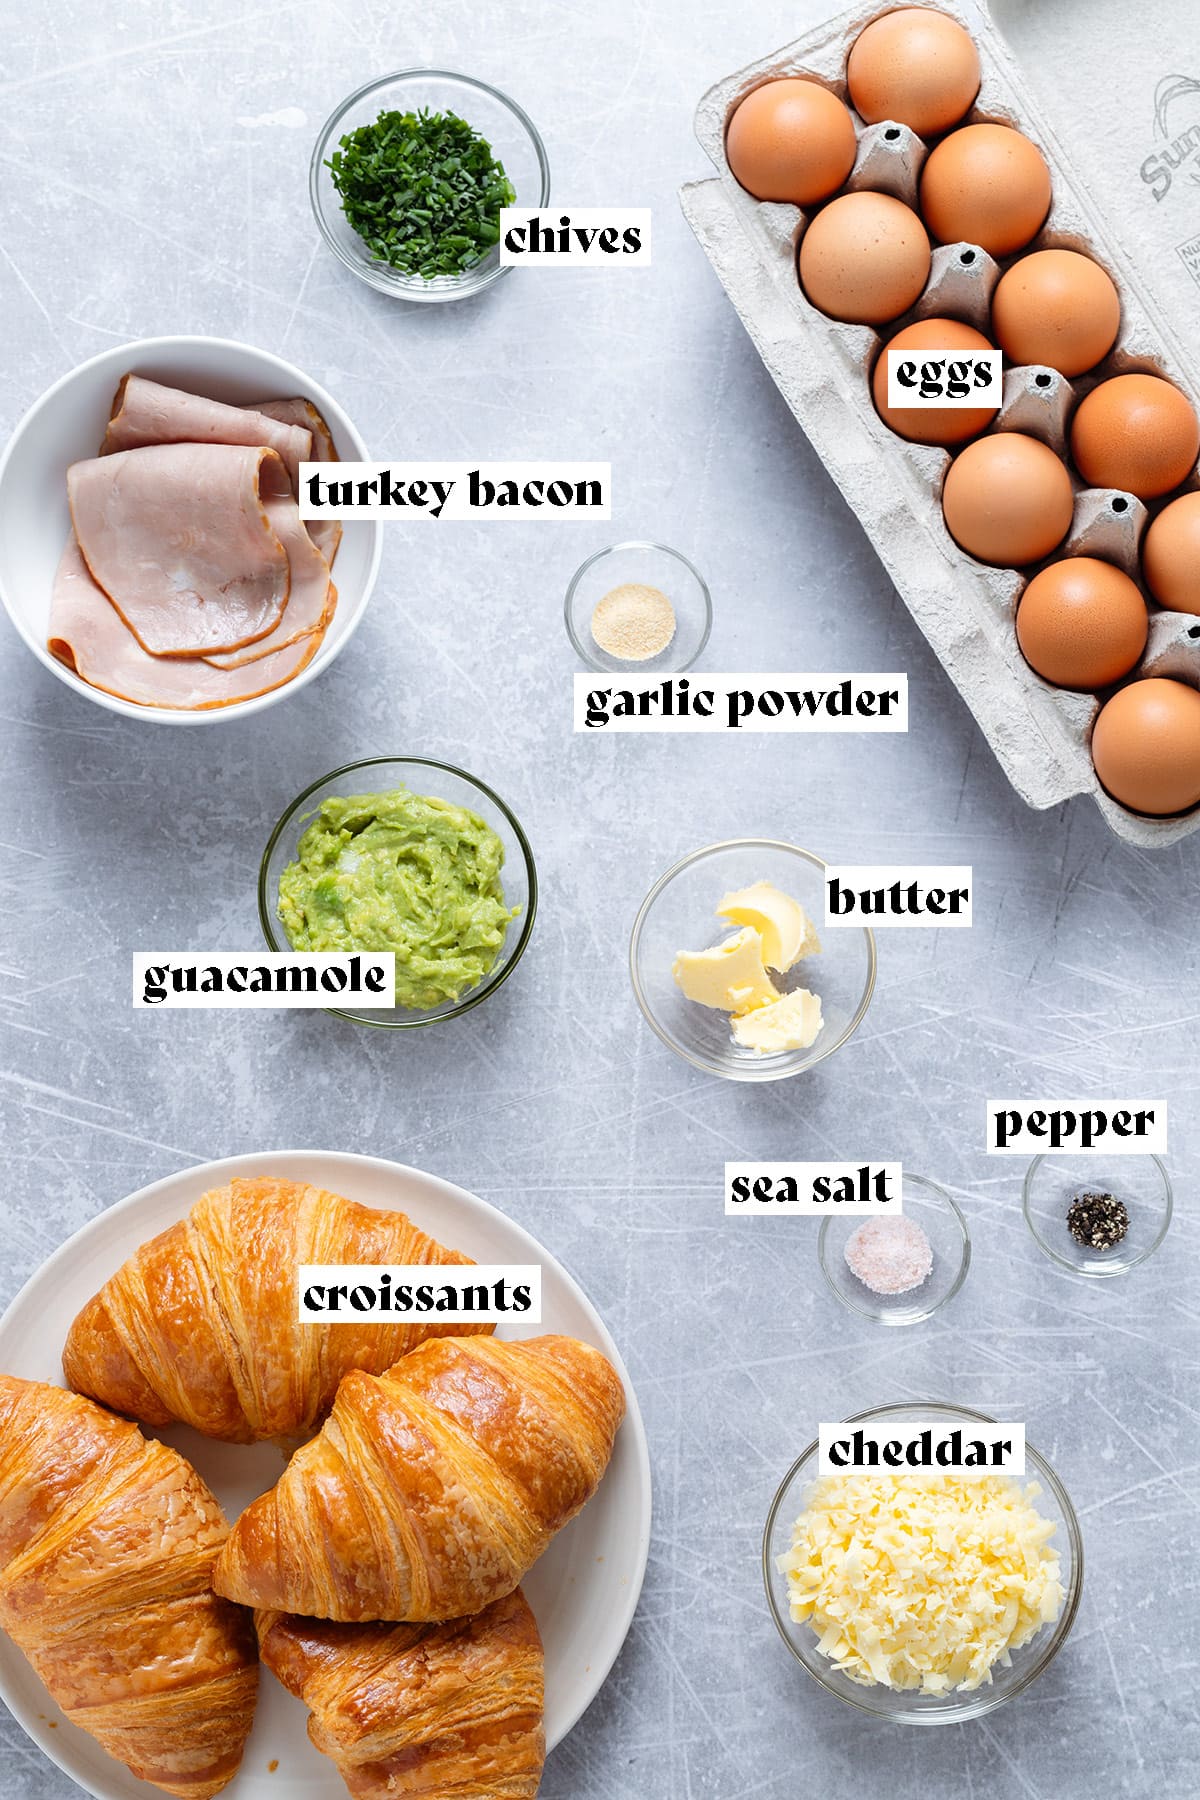 Ingredients for croissant breakfast sandwich like eggs, turkey bacon, and croissants all laid out on a metal background.